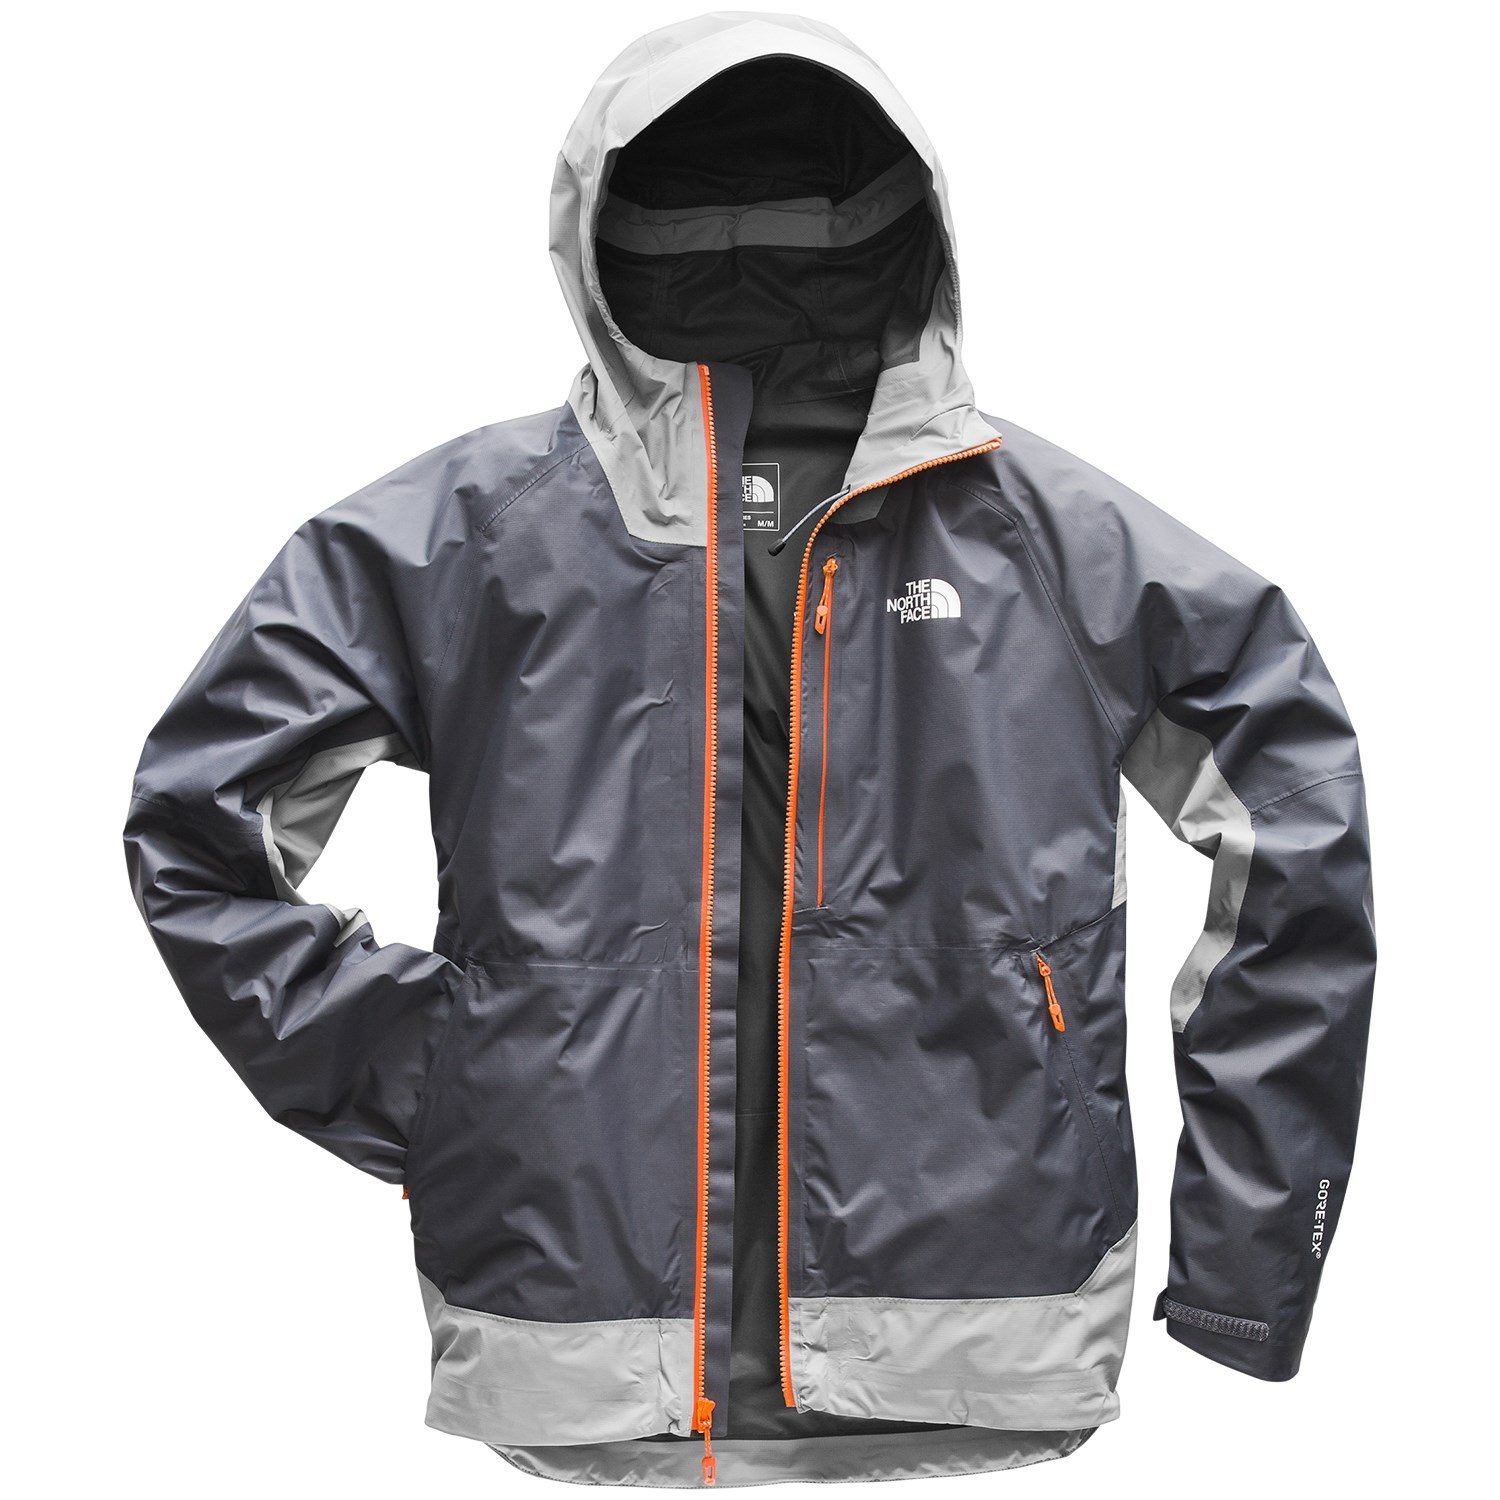 impendor shell jacket review